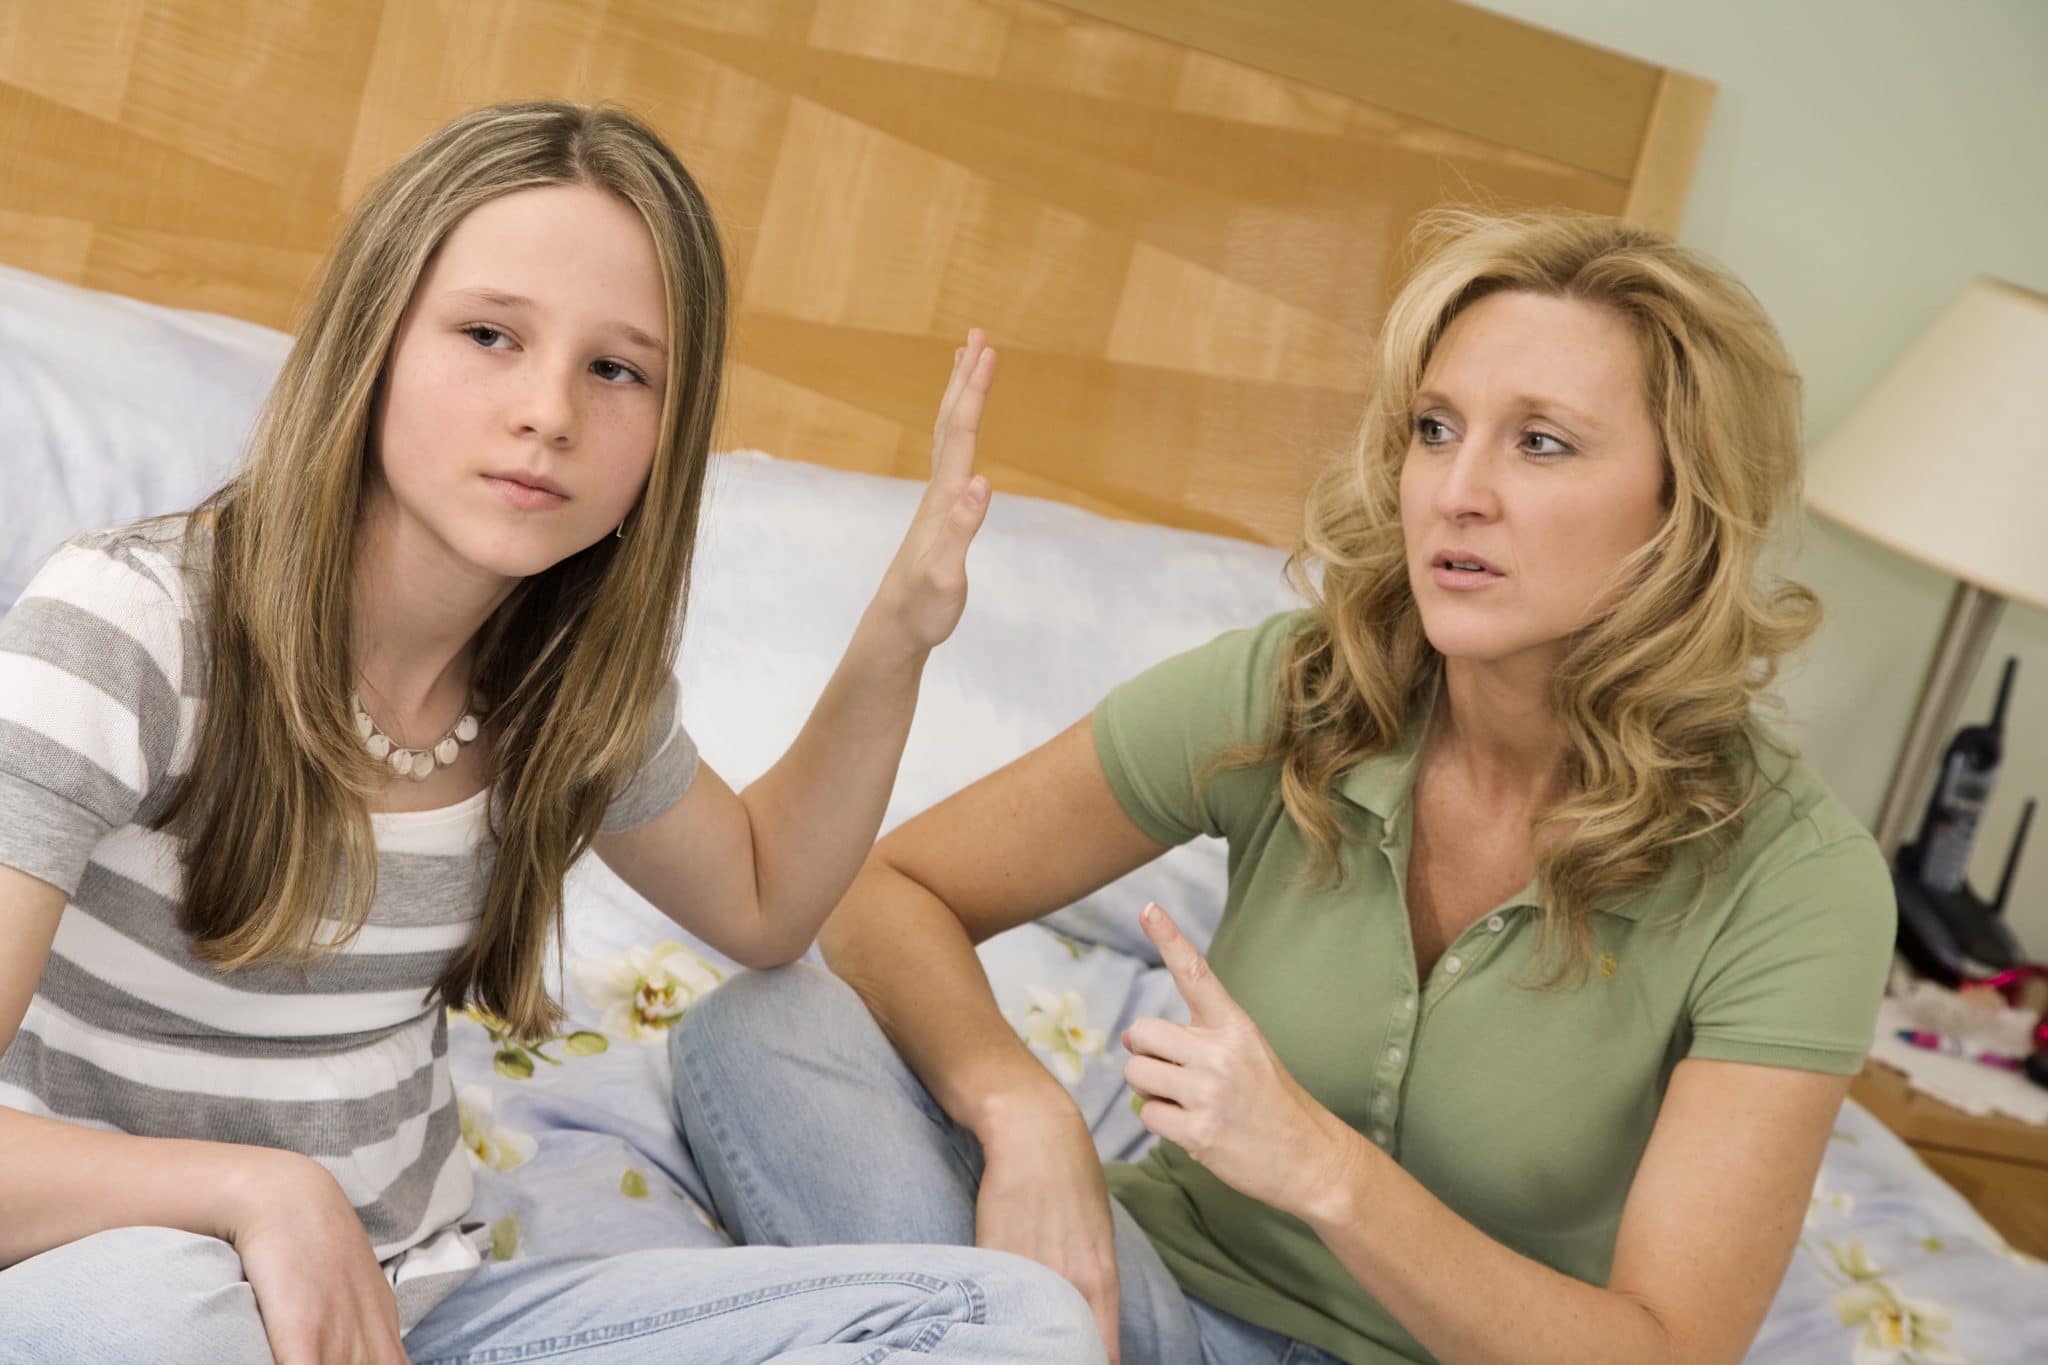 Teen daughter disrespecting mom holding hand in her face.